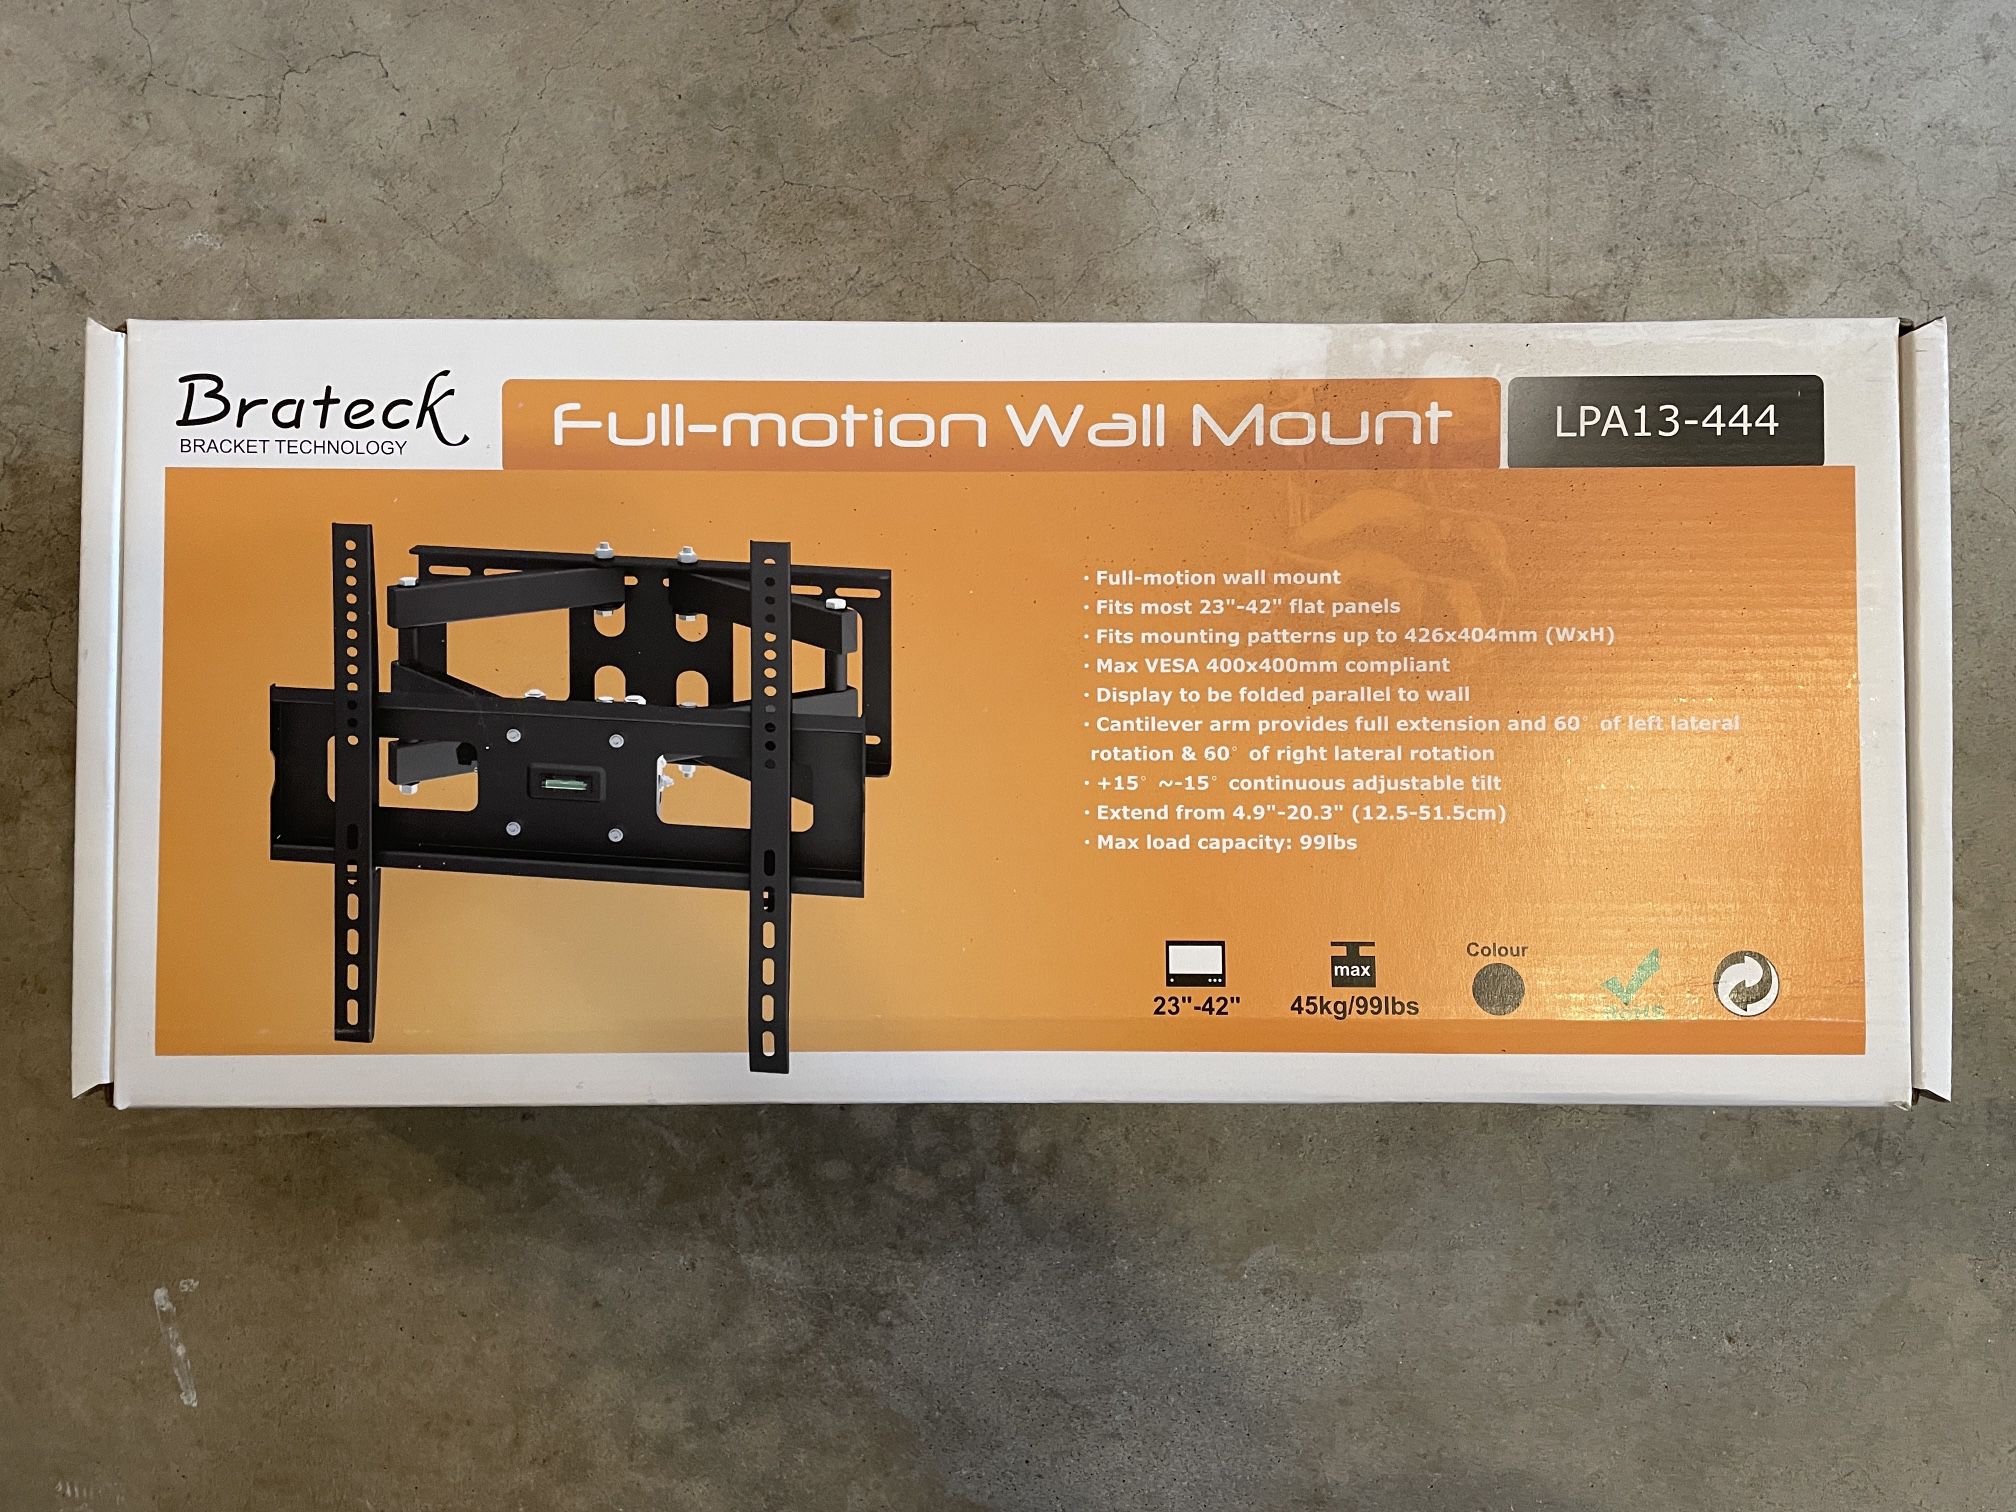 Brateck TV Full Motion Wall Mount